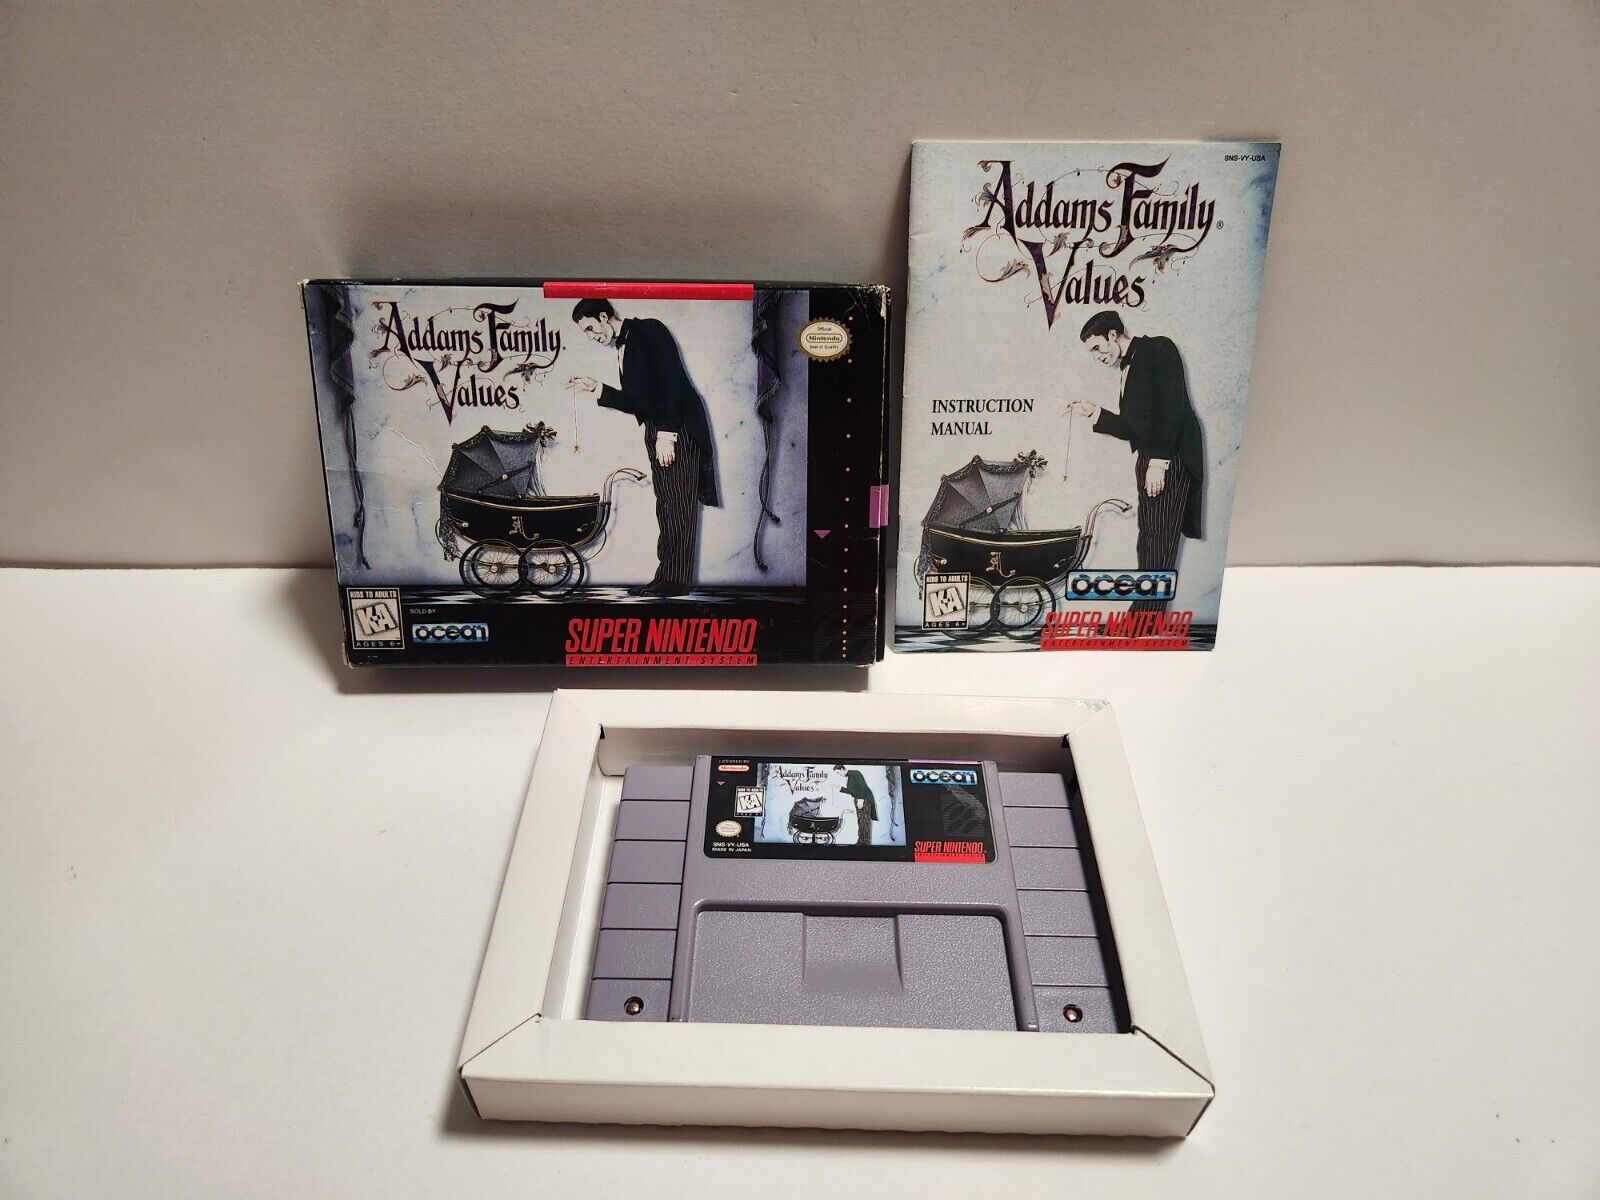 Addams Family Values (Super Nintendo) SNES Complete TESTED